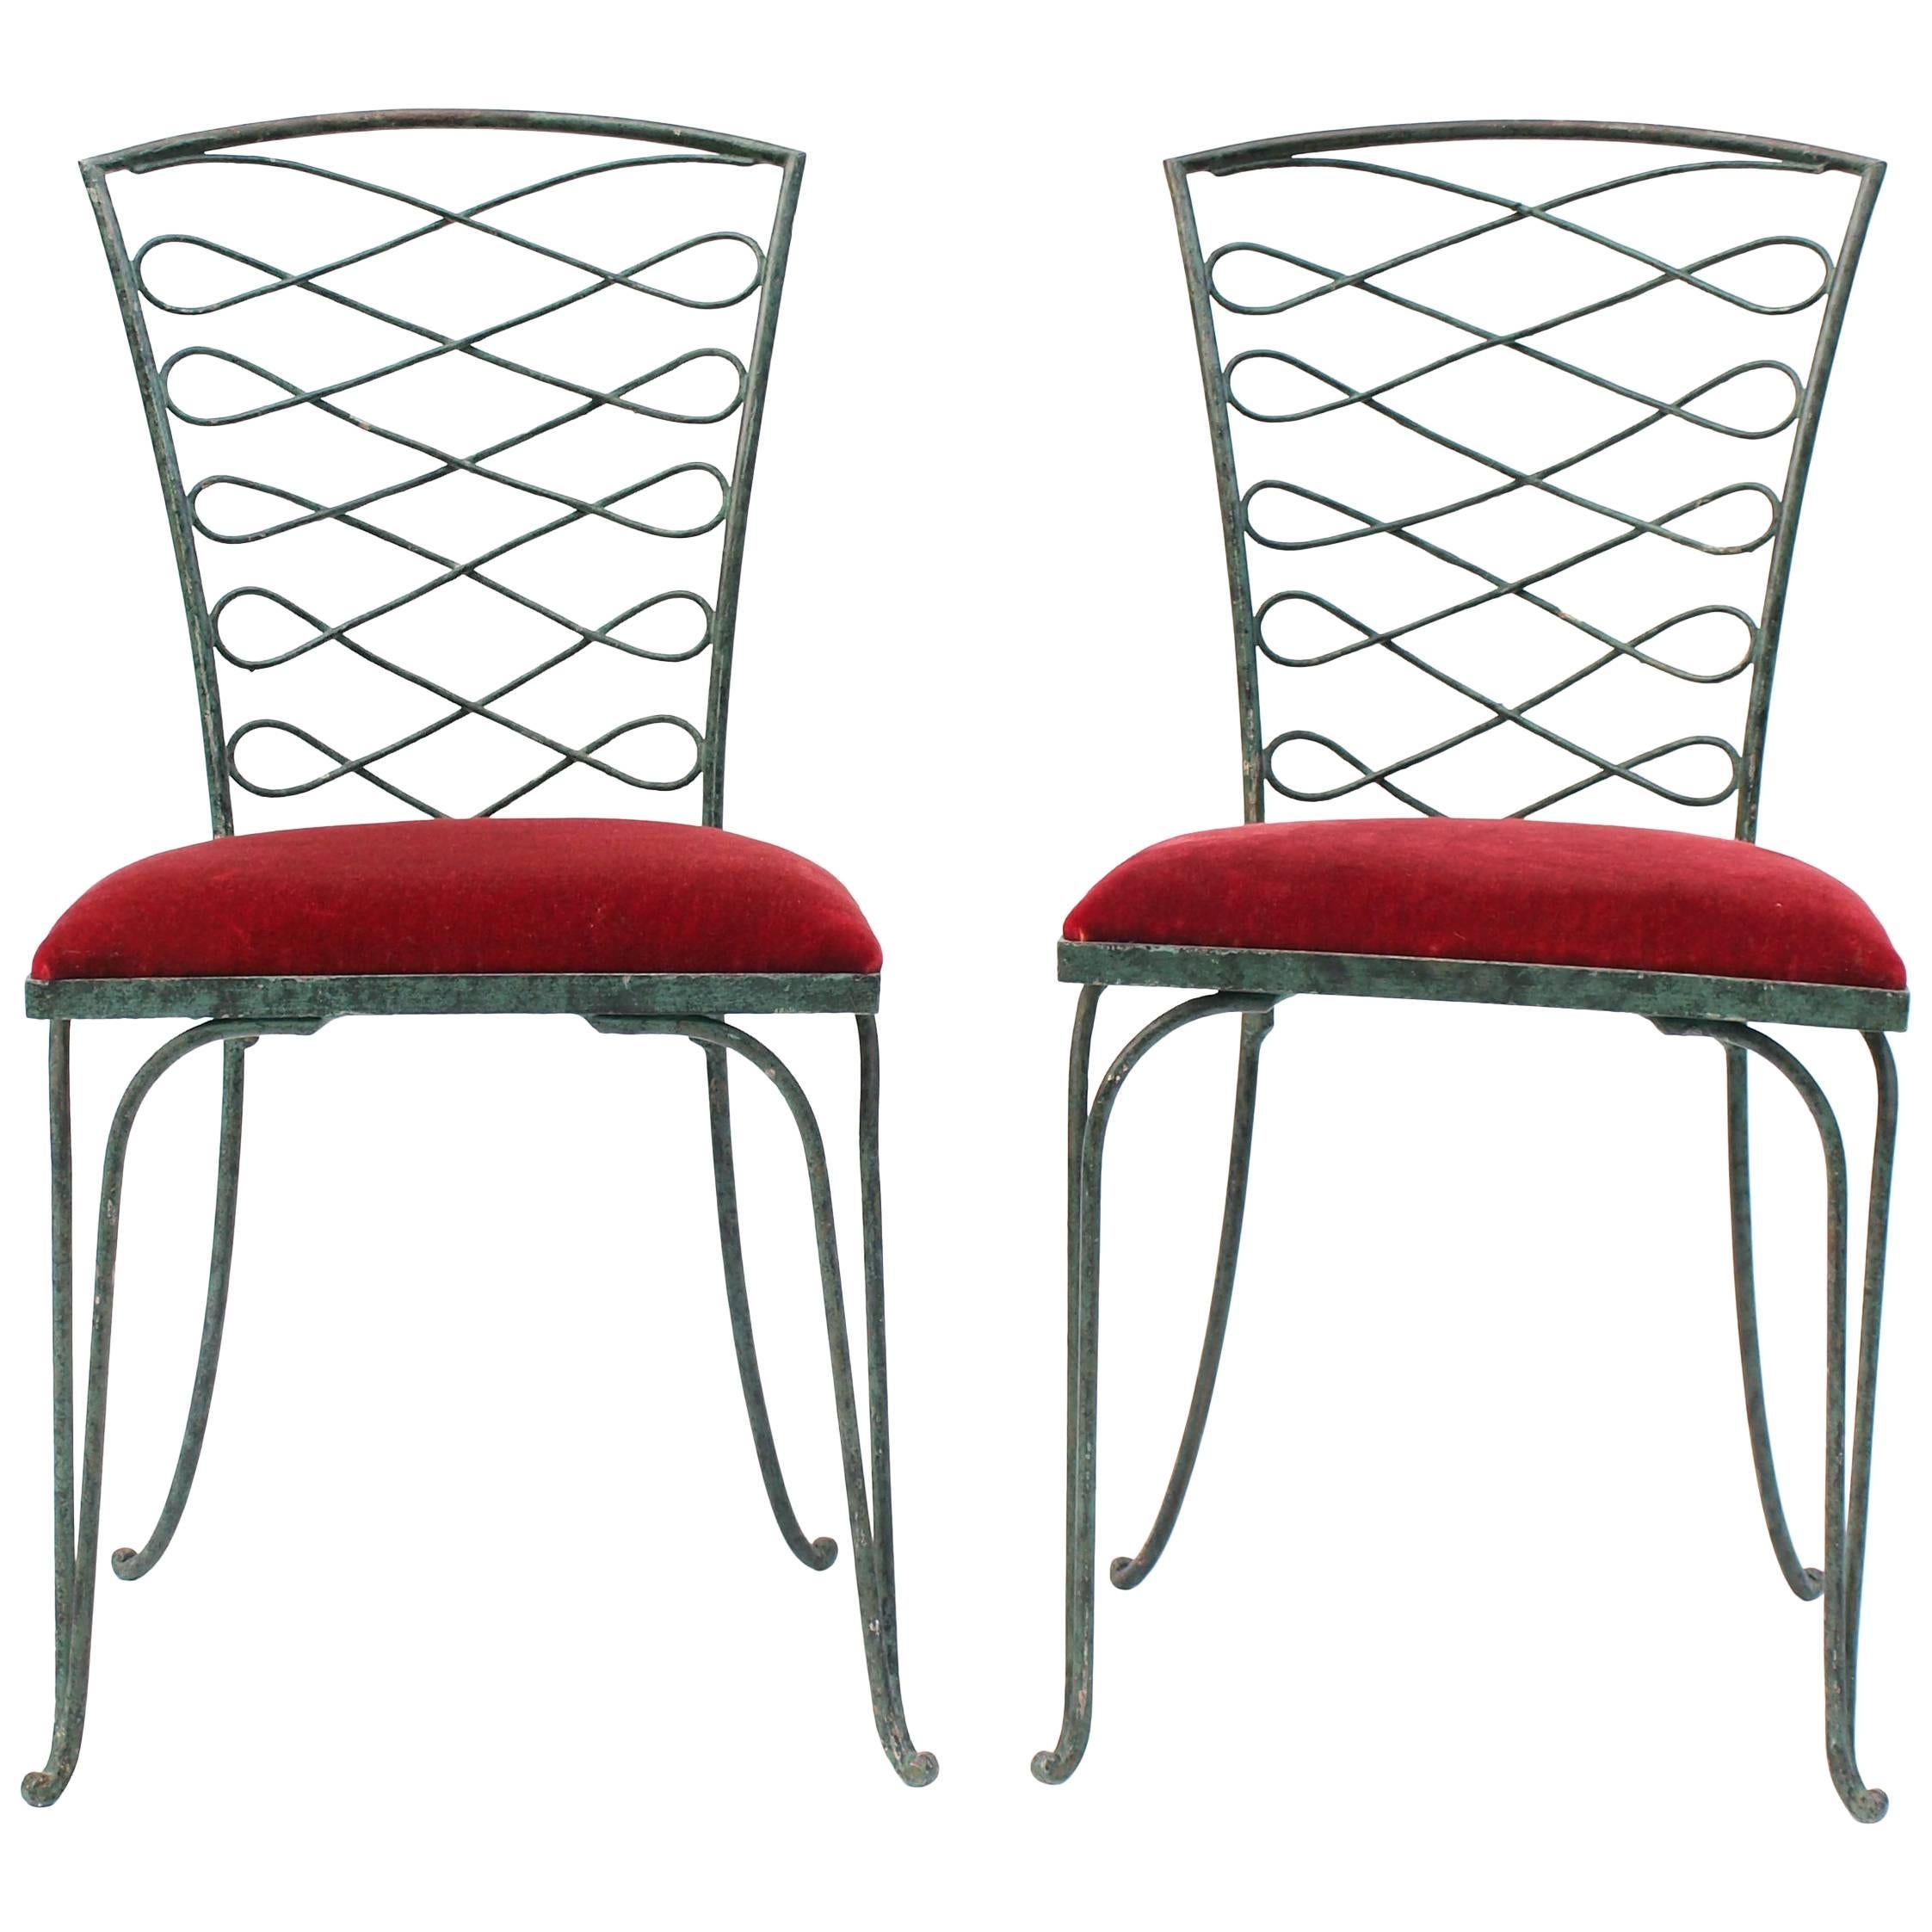 A pair of Rene Prou wrought iron chairs with a Verdigris patina. The backs have a decorative iron work scroll pattern of repeated form that rest on a subtlety turned ball foot and upholstered in red velvet.